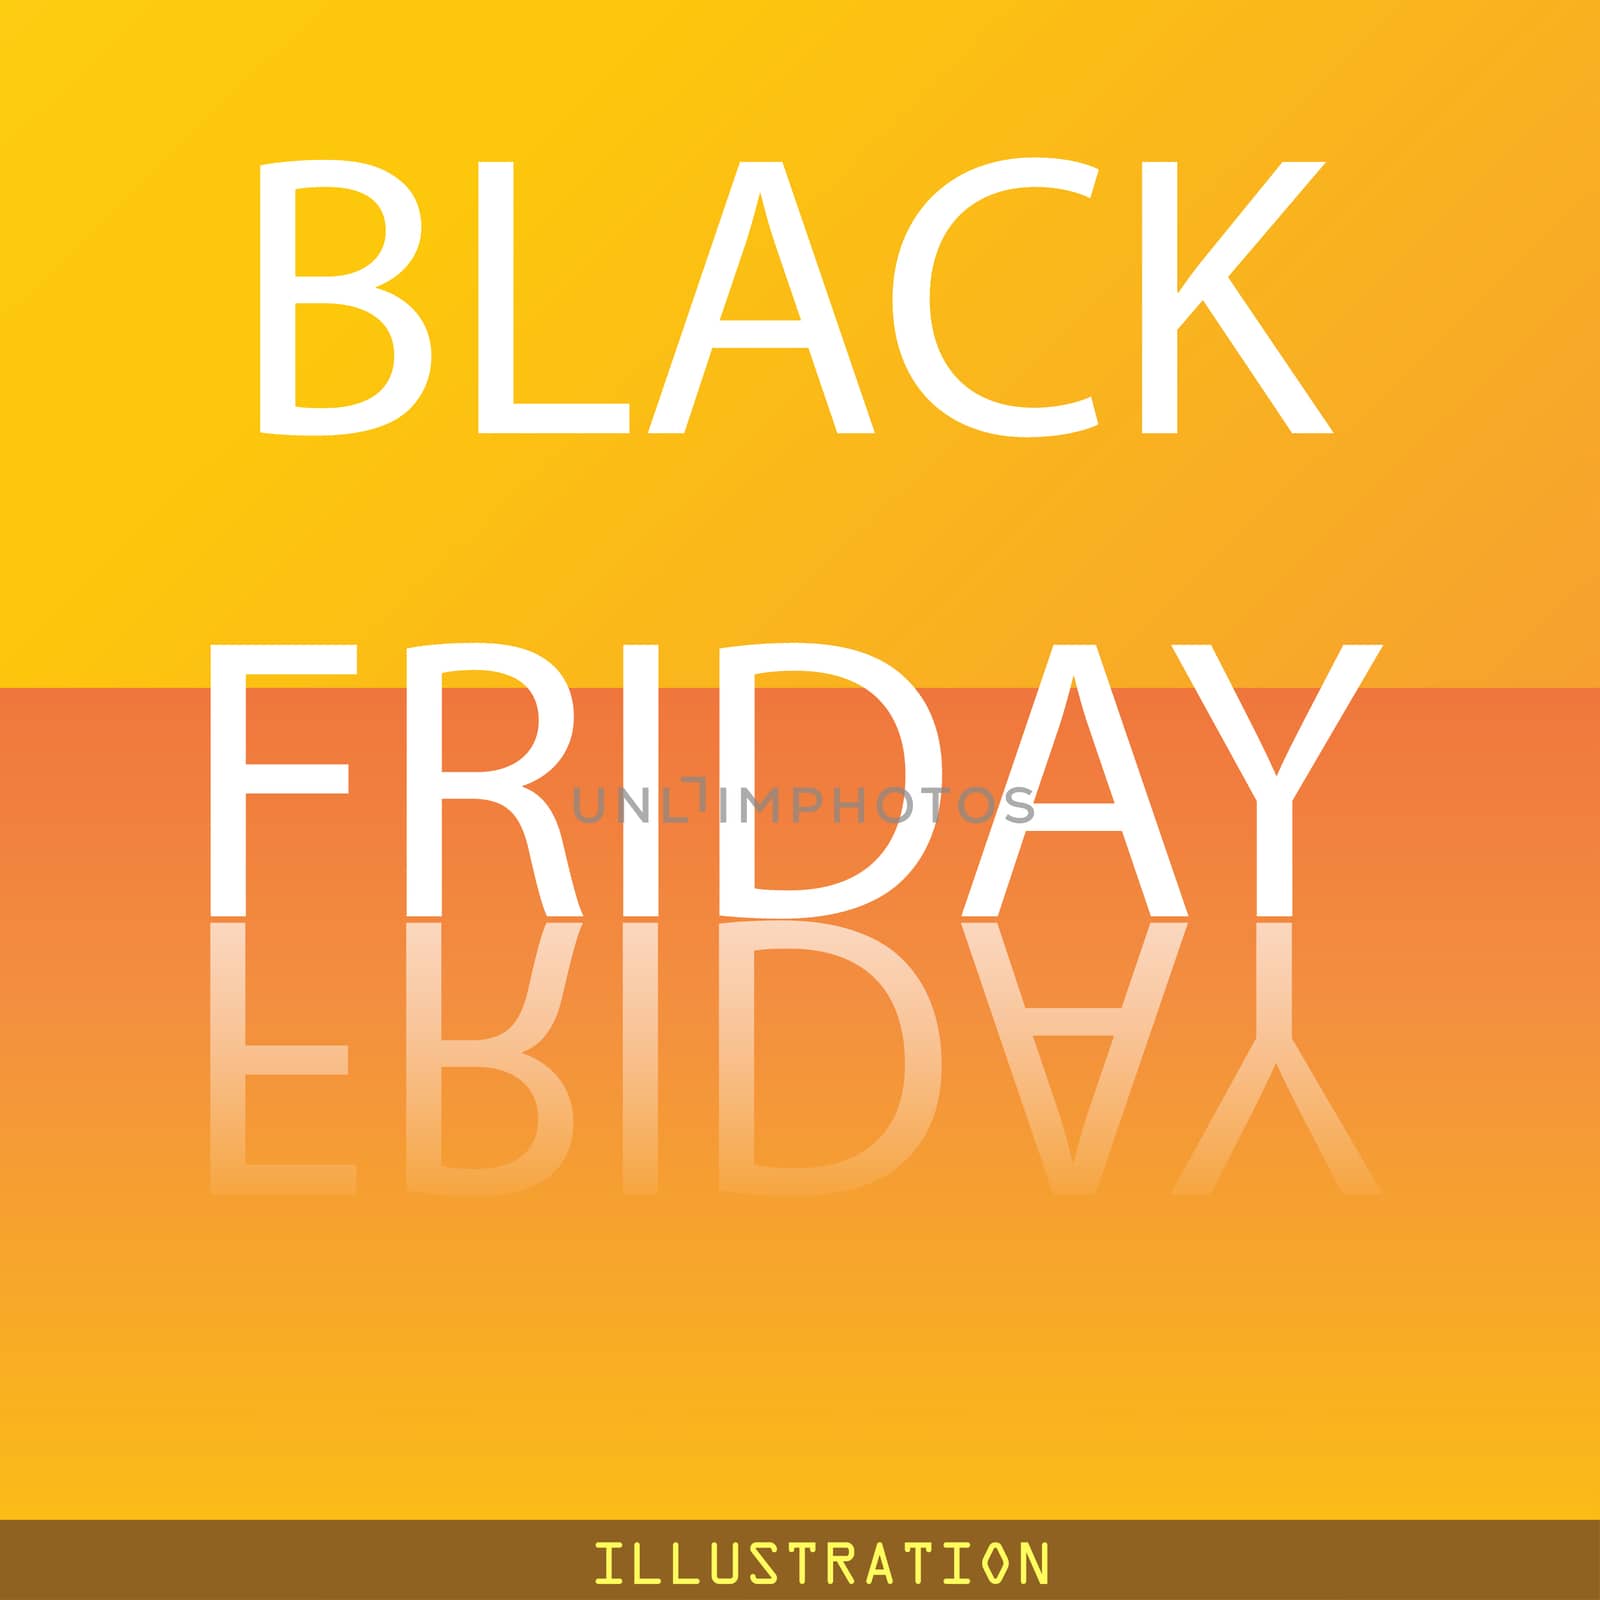 Black friday icon symbol Flat modern web design with reflection and space for your text. illustration. Raster version